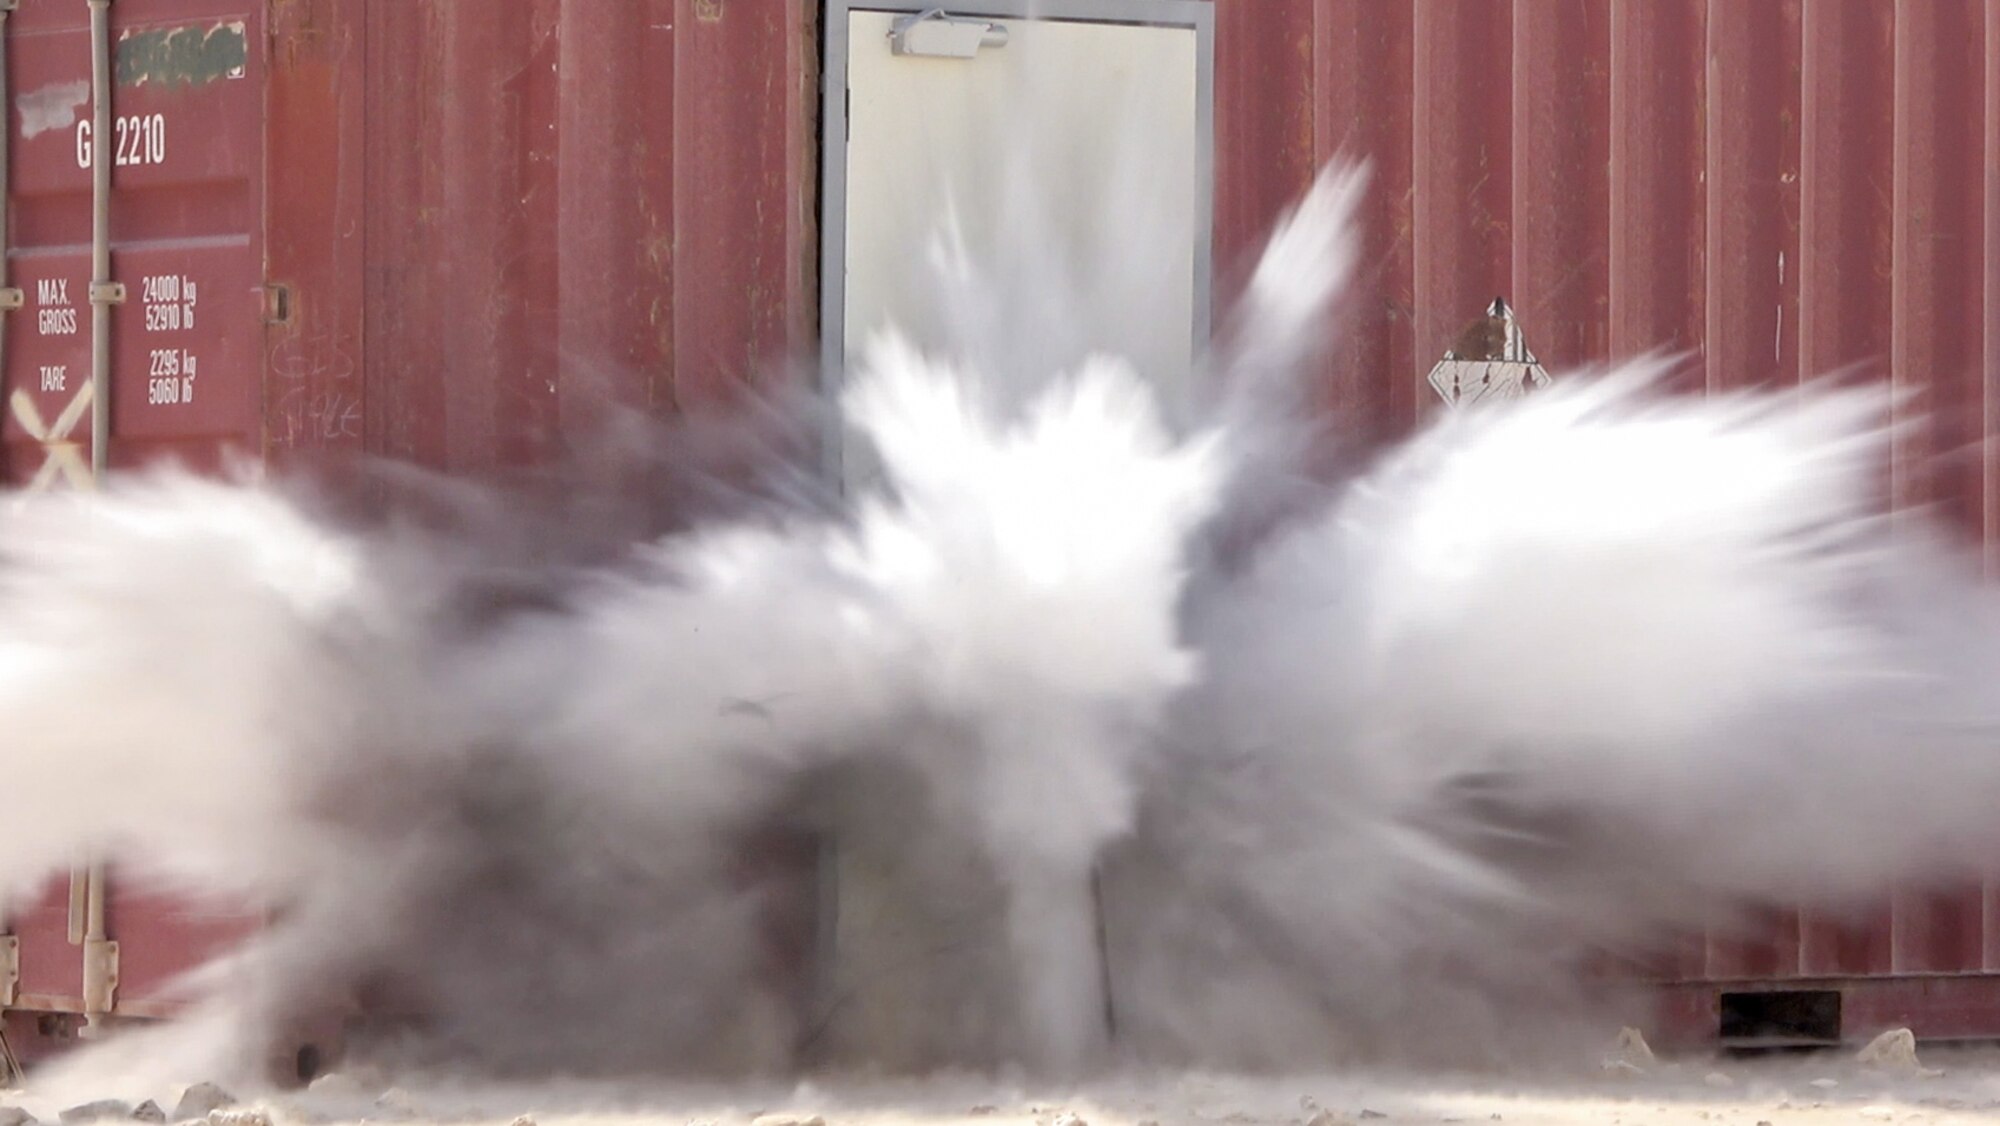 Explosives are detonated on a decoy doorframe as part of a training on Al Udeid Air Base, Qatar, July 1, 2022. Safety is always paramount when handling explosive ordinance. (U.S. Air National Guard photo by Airman 1st Class Constantine Bambakidis)